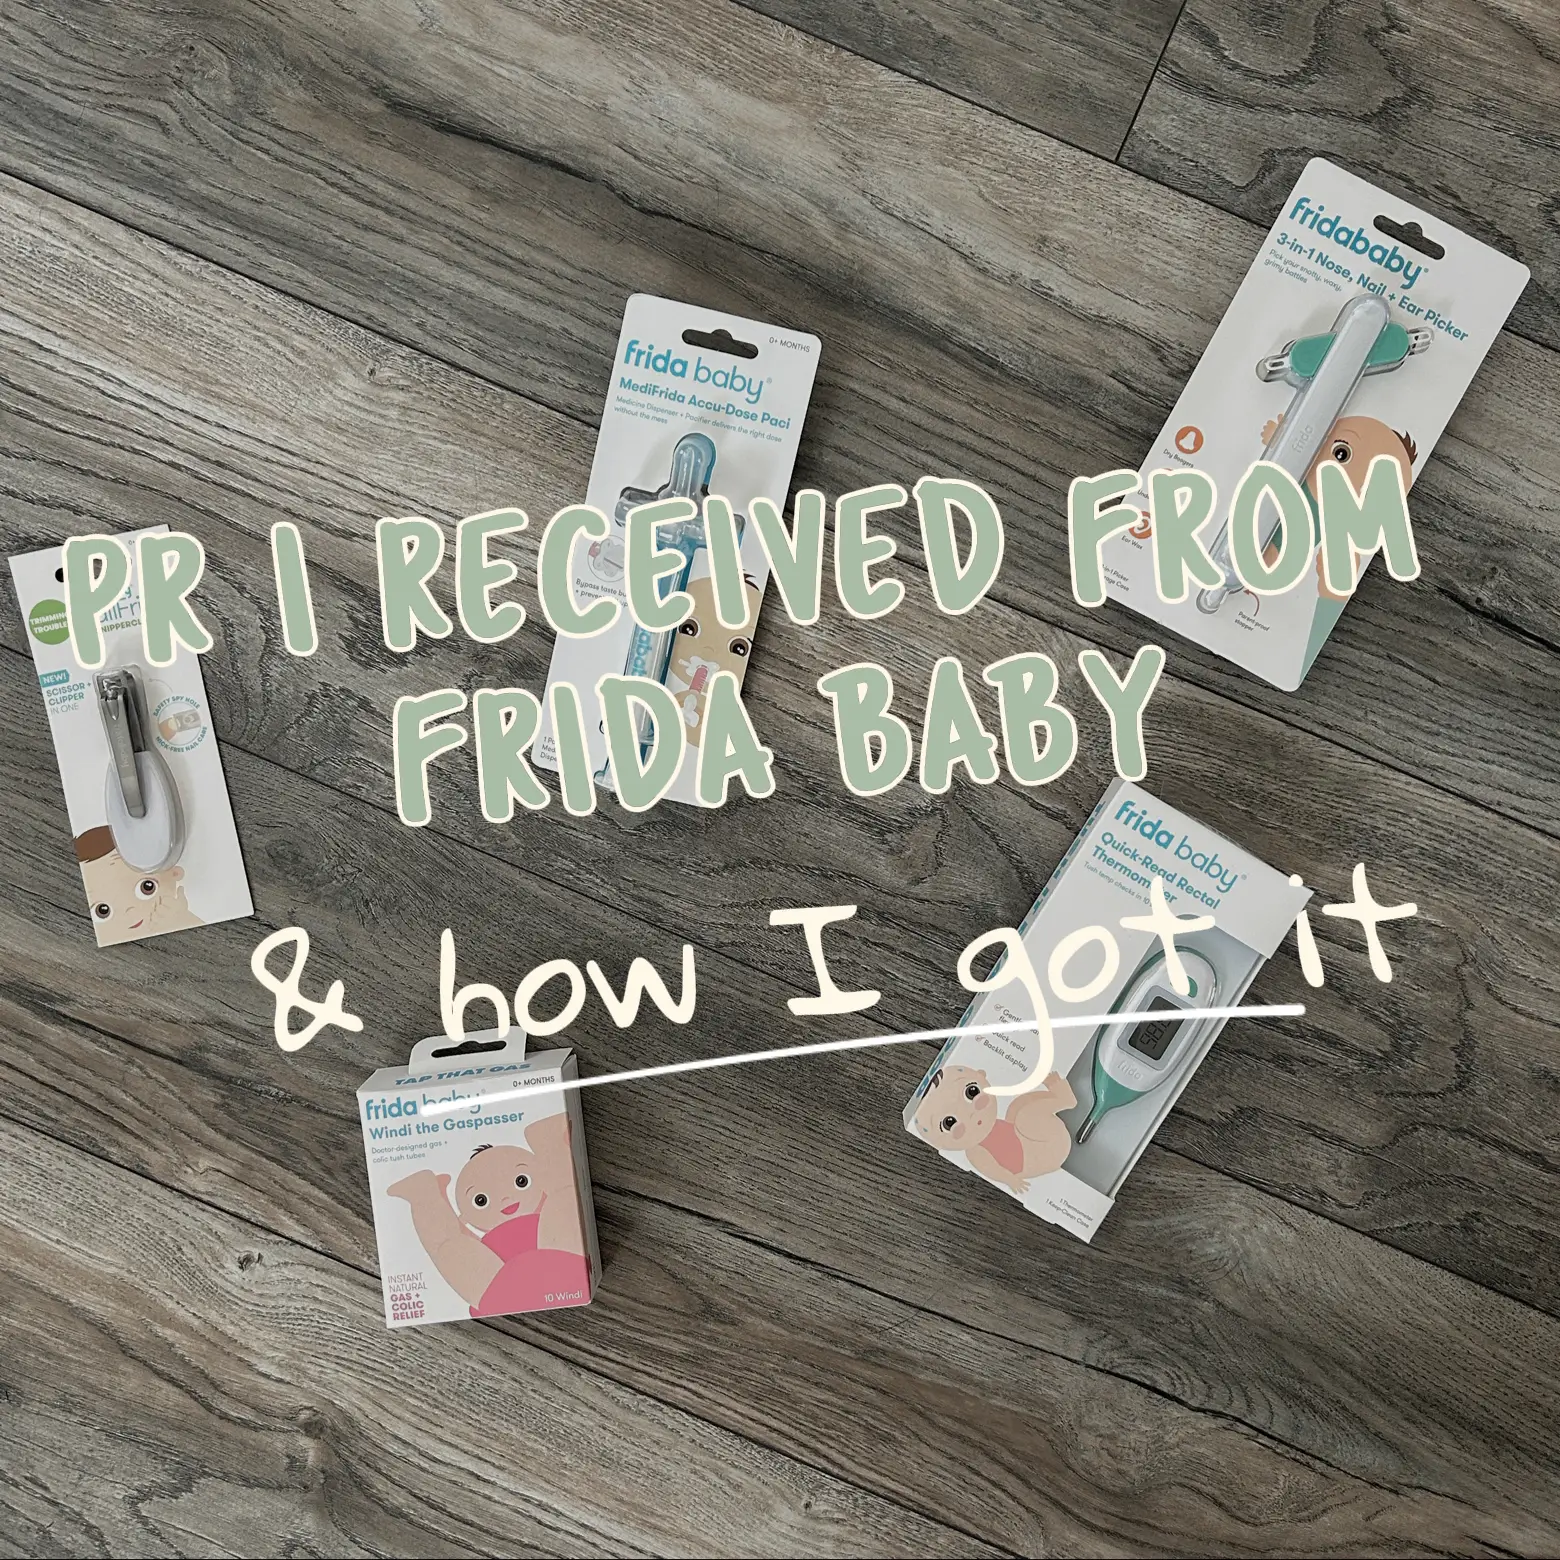 PR I RECEIVED FROM FRIDA BABY + How I Got it, Gallery posted by Brianna